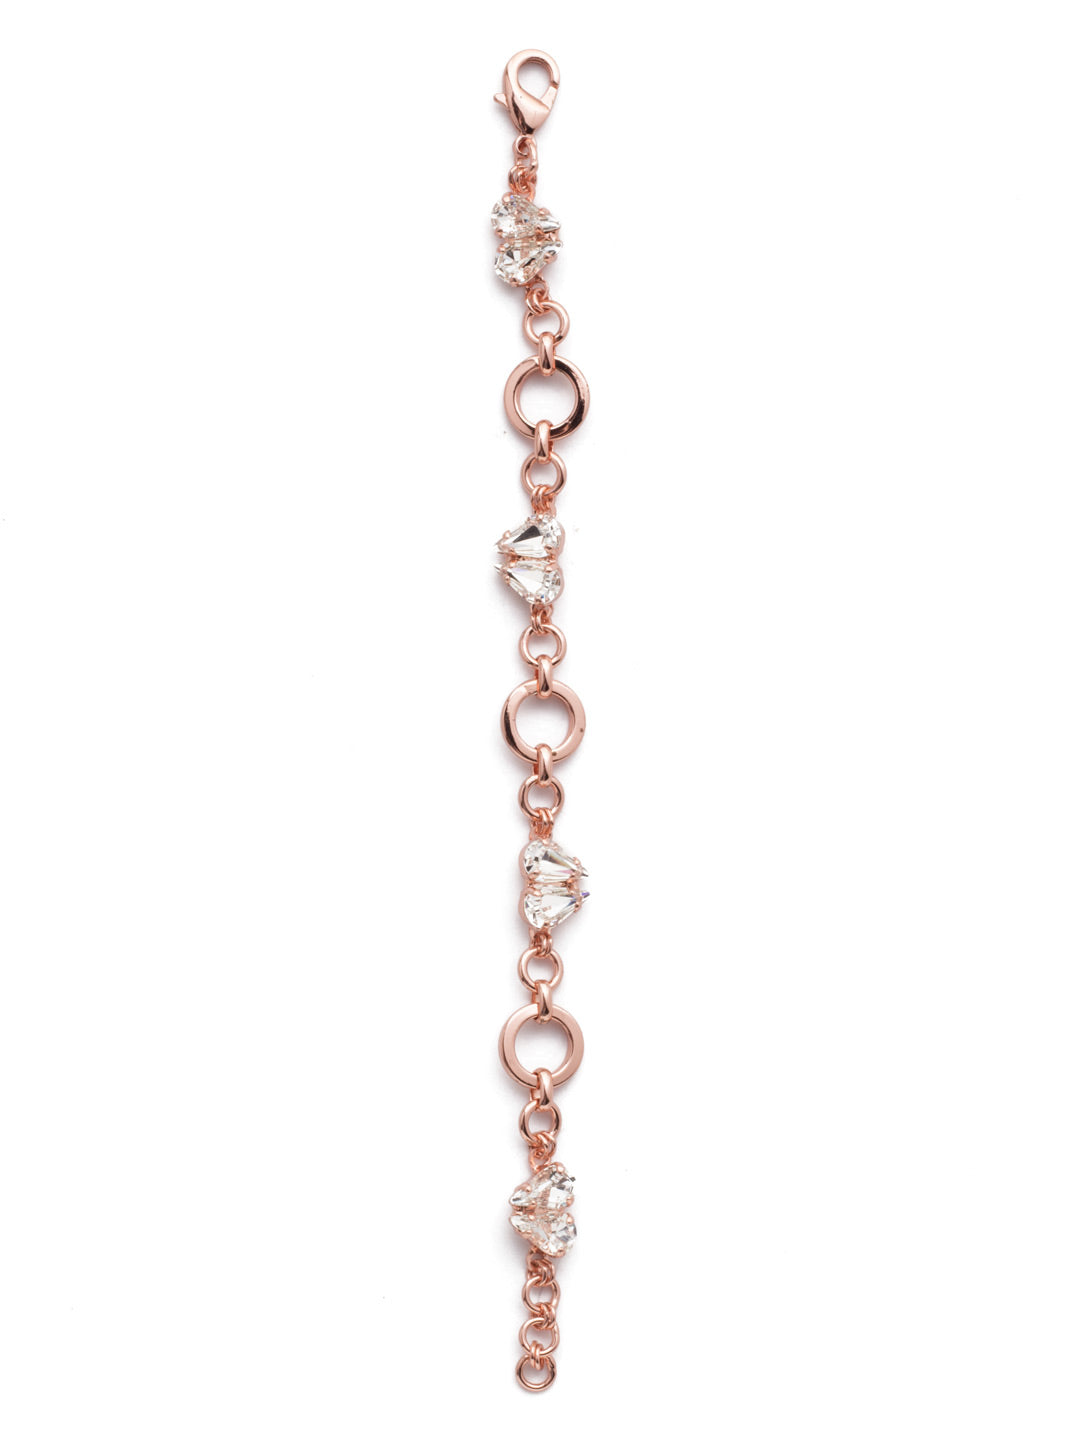 Mina Tennis Bracelet - BER44RGCRY - <p>Fasten on the Mina Tennis Bracelet for a a stunning crystal heart look that's perfect for any occasion or outfit. It goes beyond Valentine's Day. From Sorrelli's Crystal collection in our Rose Gold-tone finish.</p>